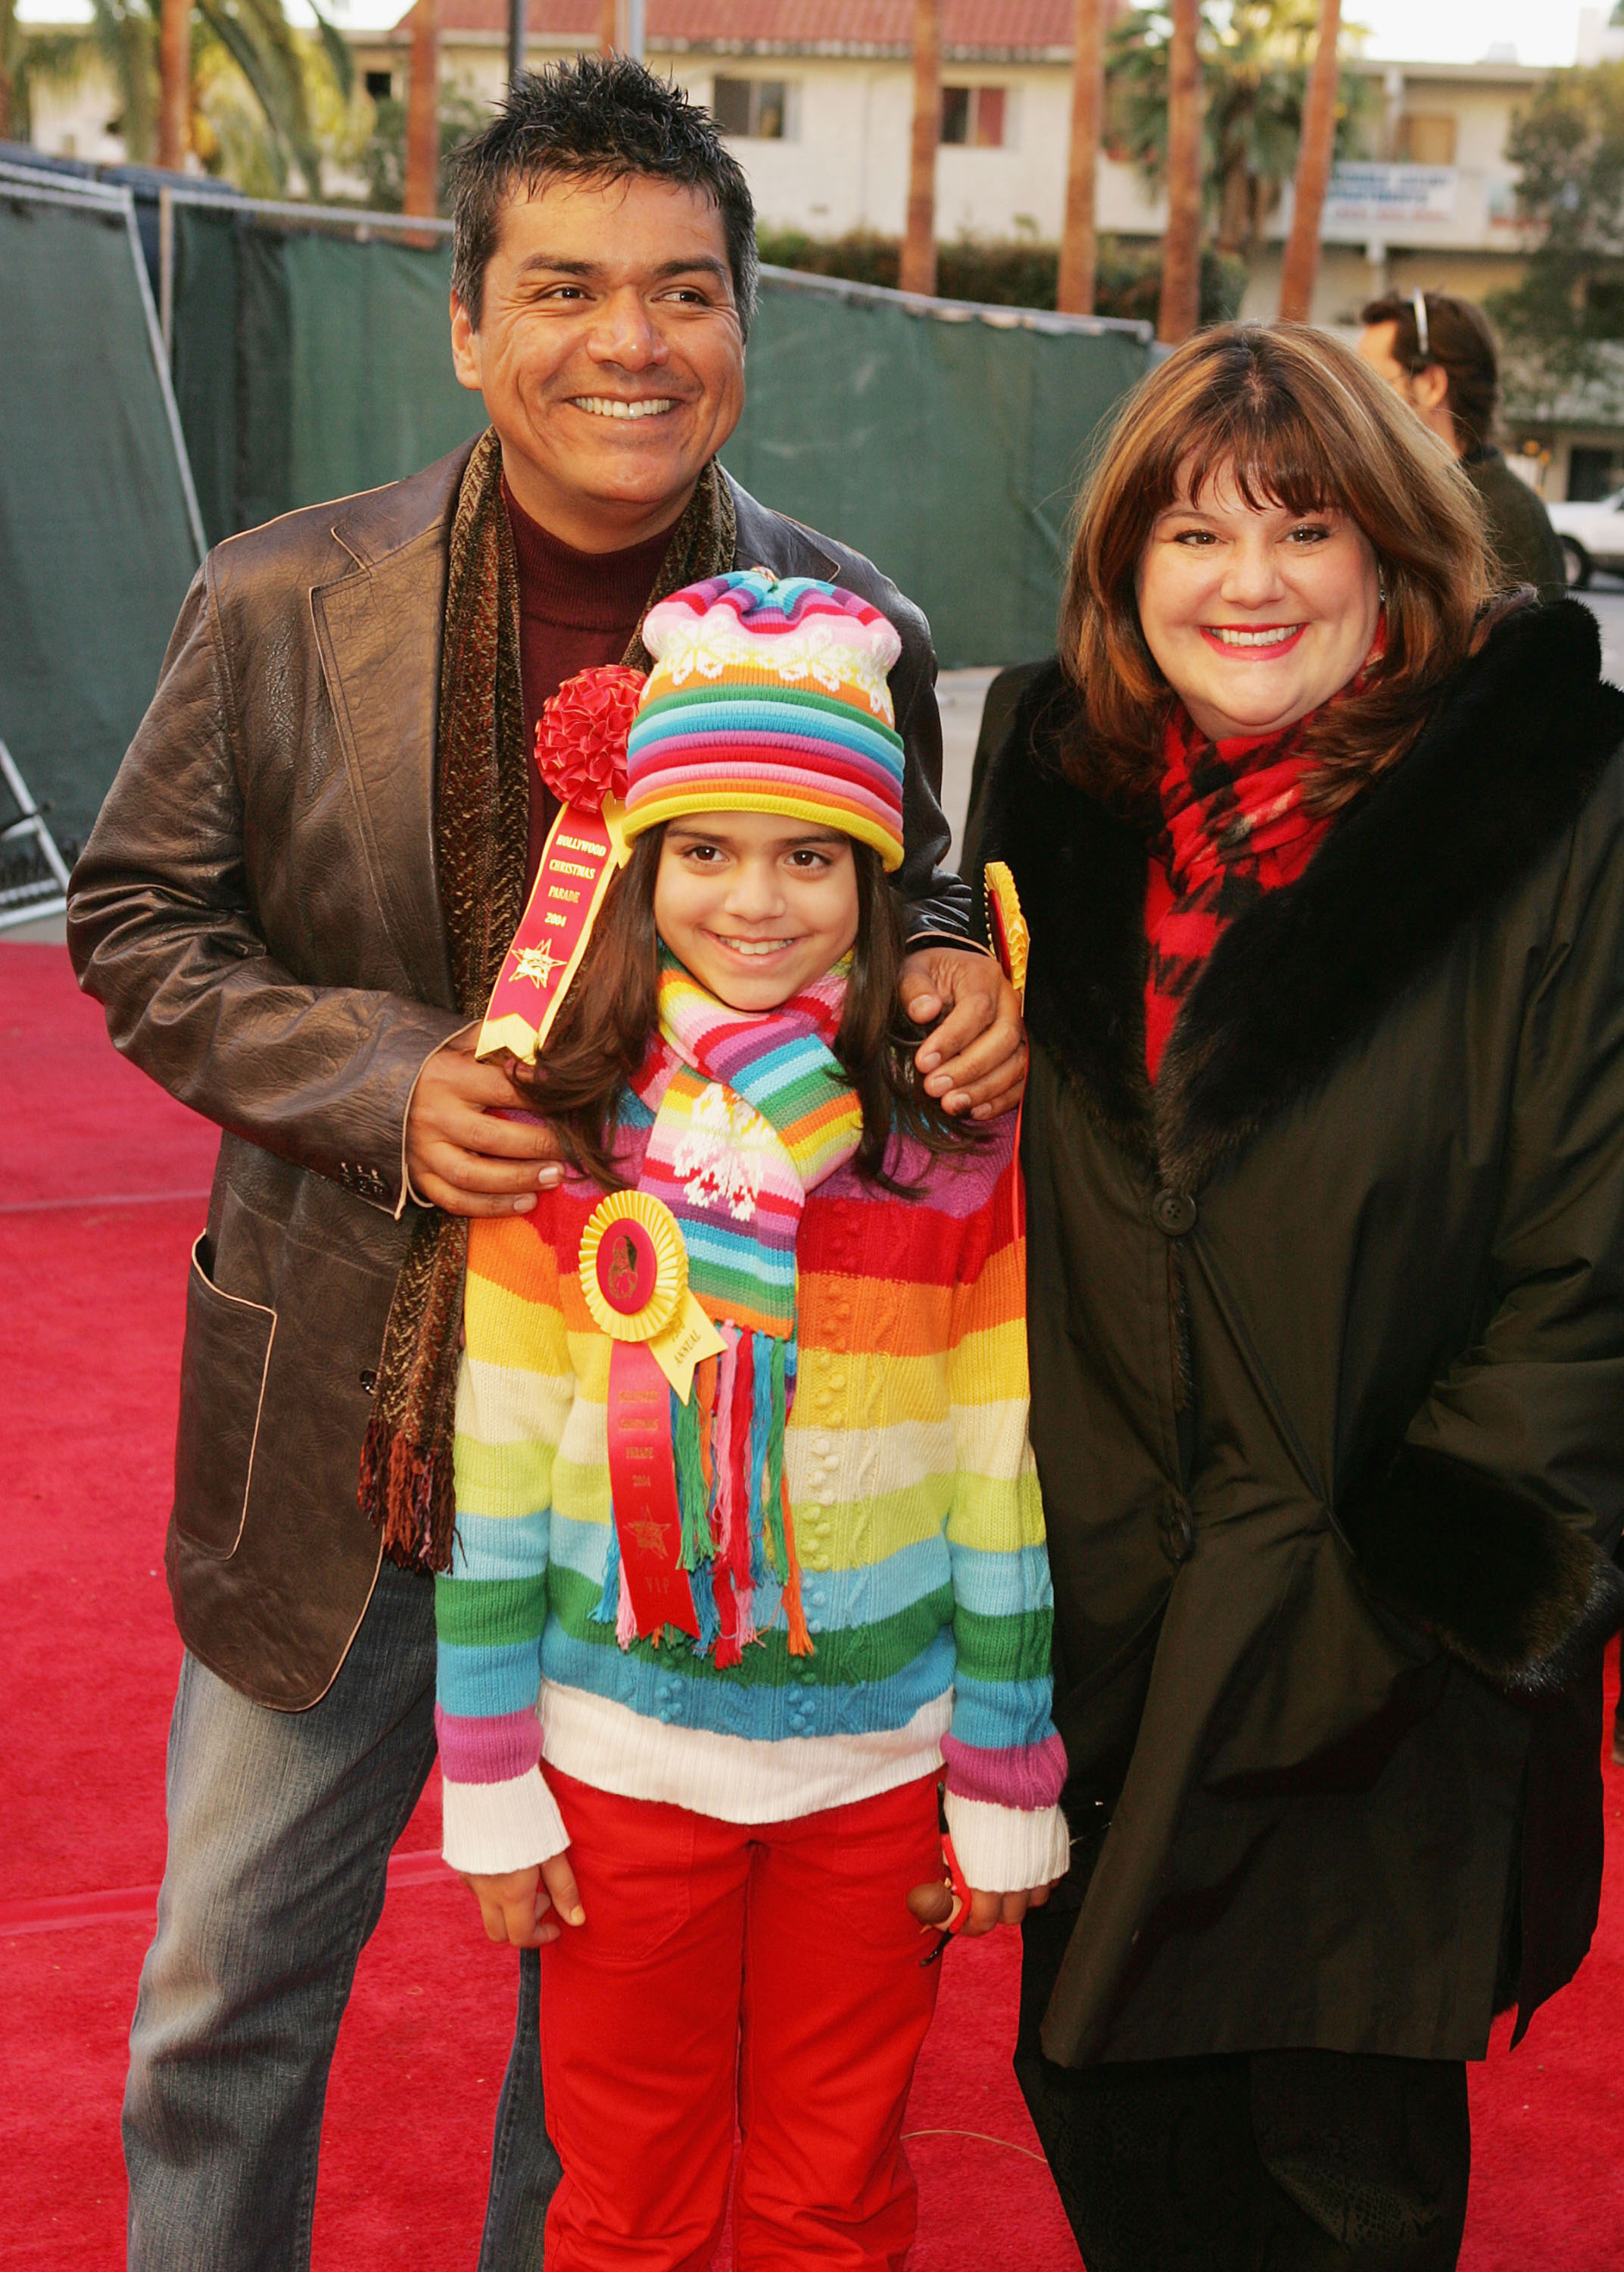 Actor George Lopez (L), his wife Ann and daughter Maya arrive at the 73rd Annual Hollywood Christmas Parade on November 28, 2004 in Hollywood, California. | Source: Getty Images